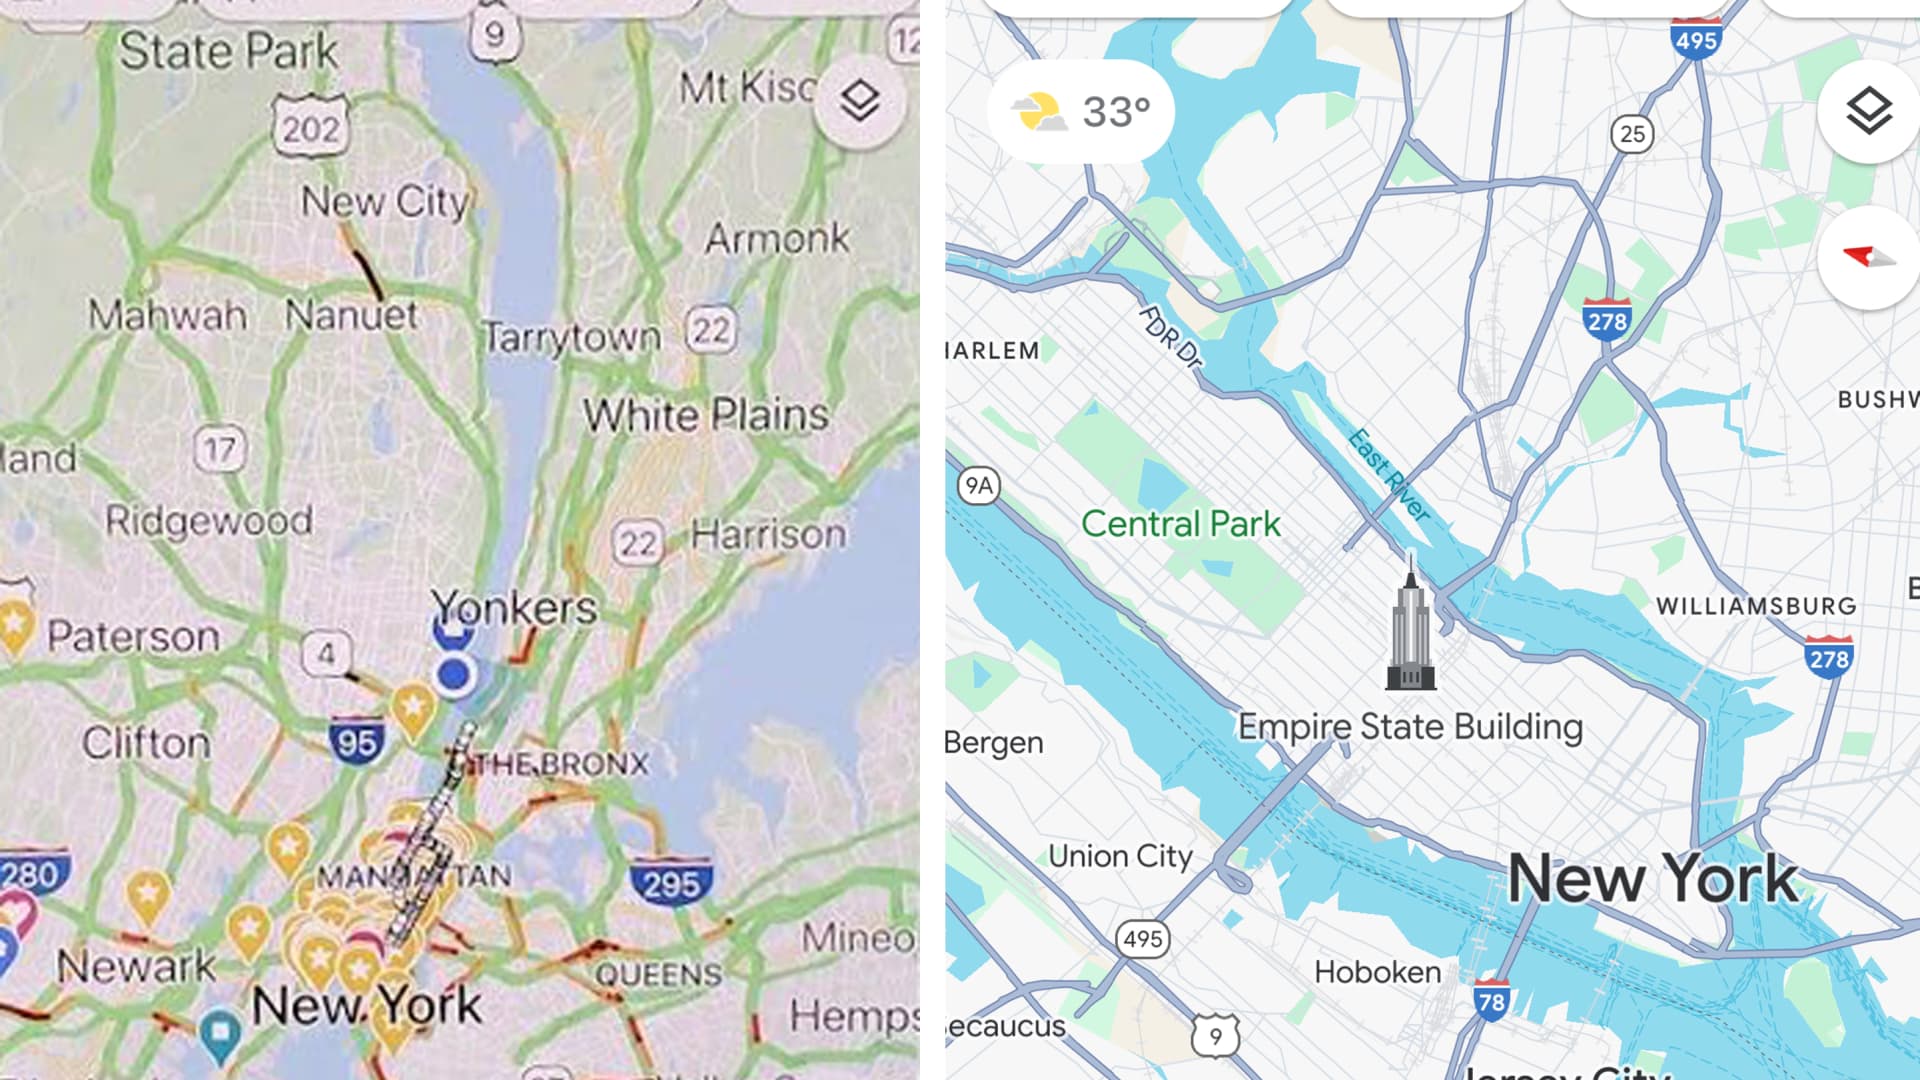 Combo shows Google Maps old look and new updated design.